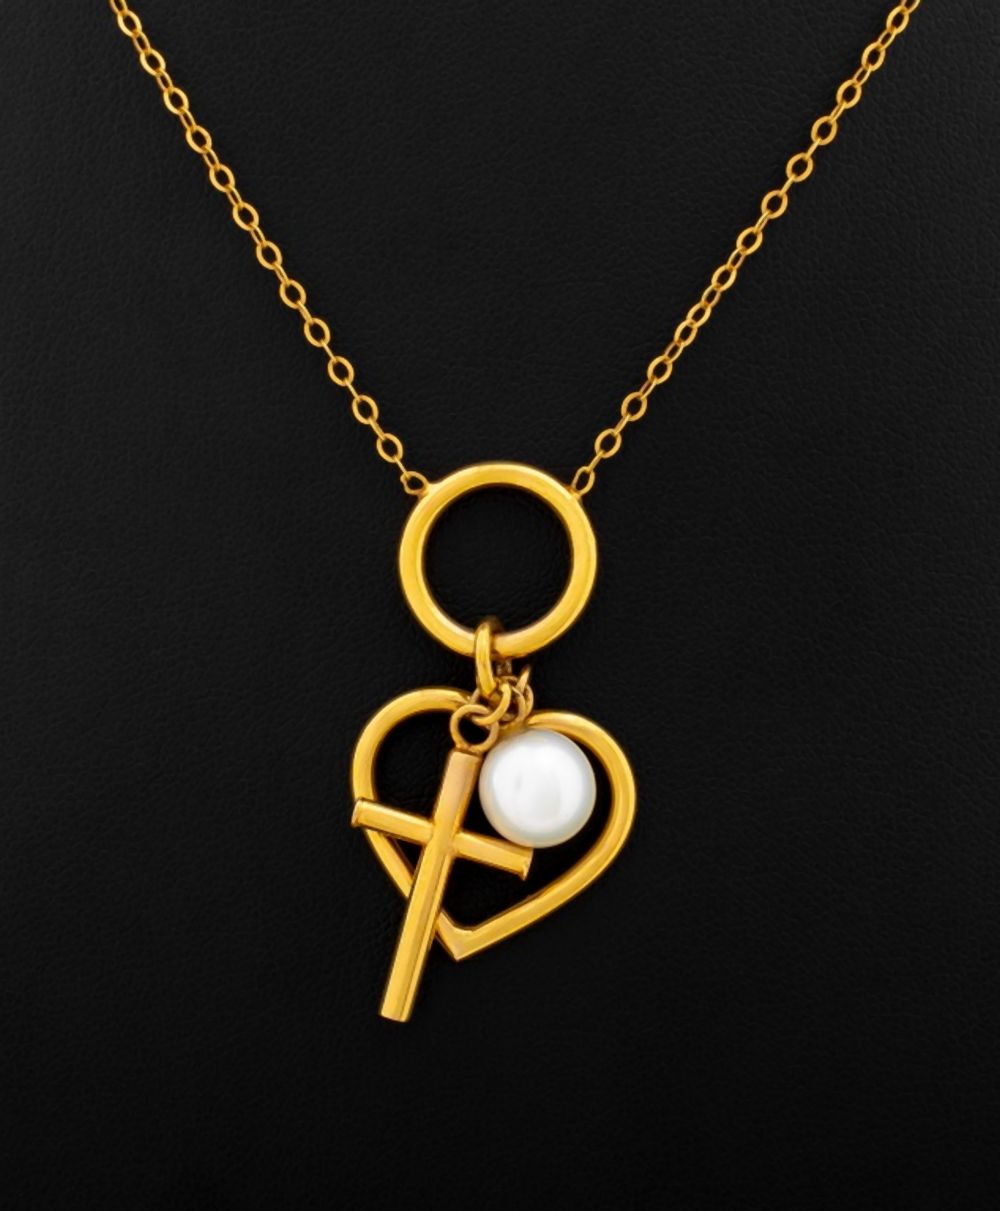 14K YELLOW GOLD CHARM PENDANT NECKLACE